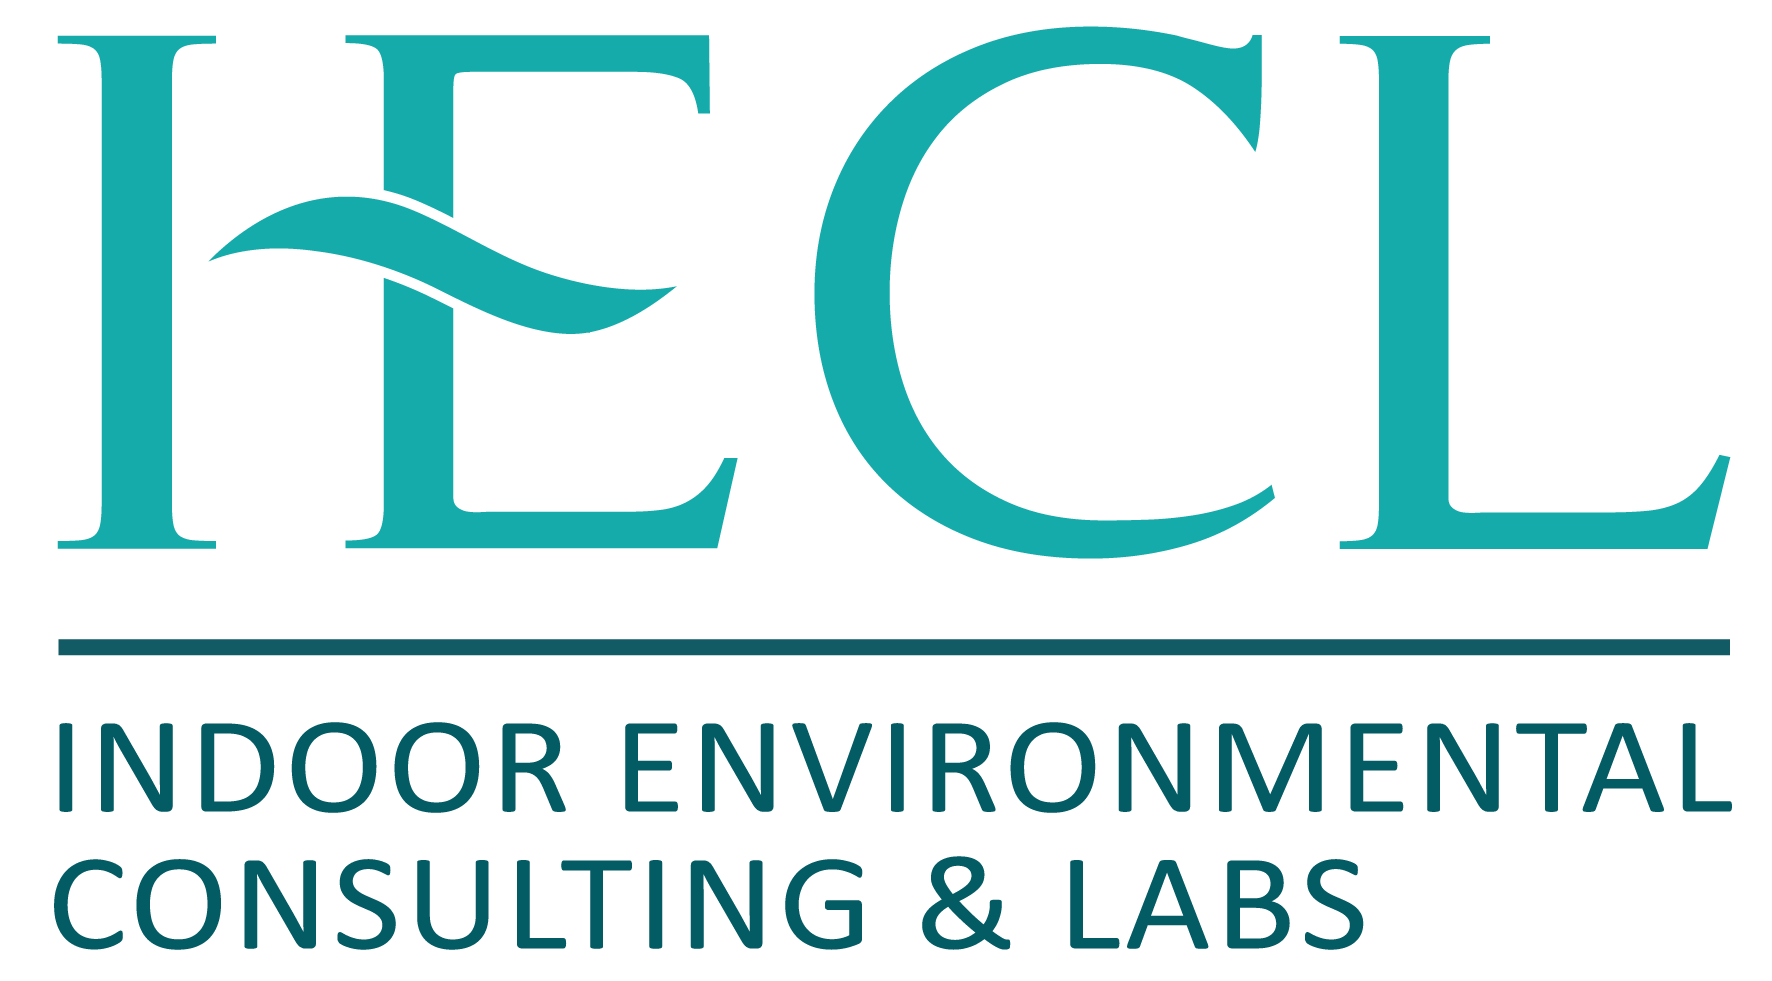 Indoor Environmental Consulting & Labs (IECL)